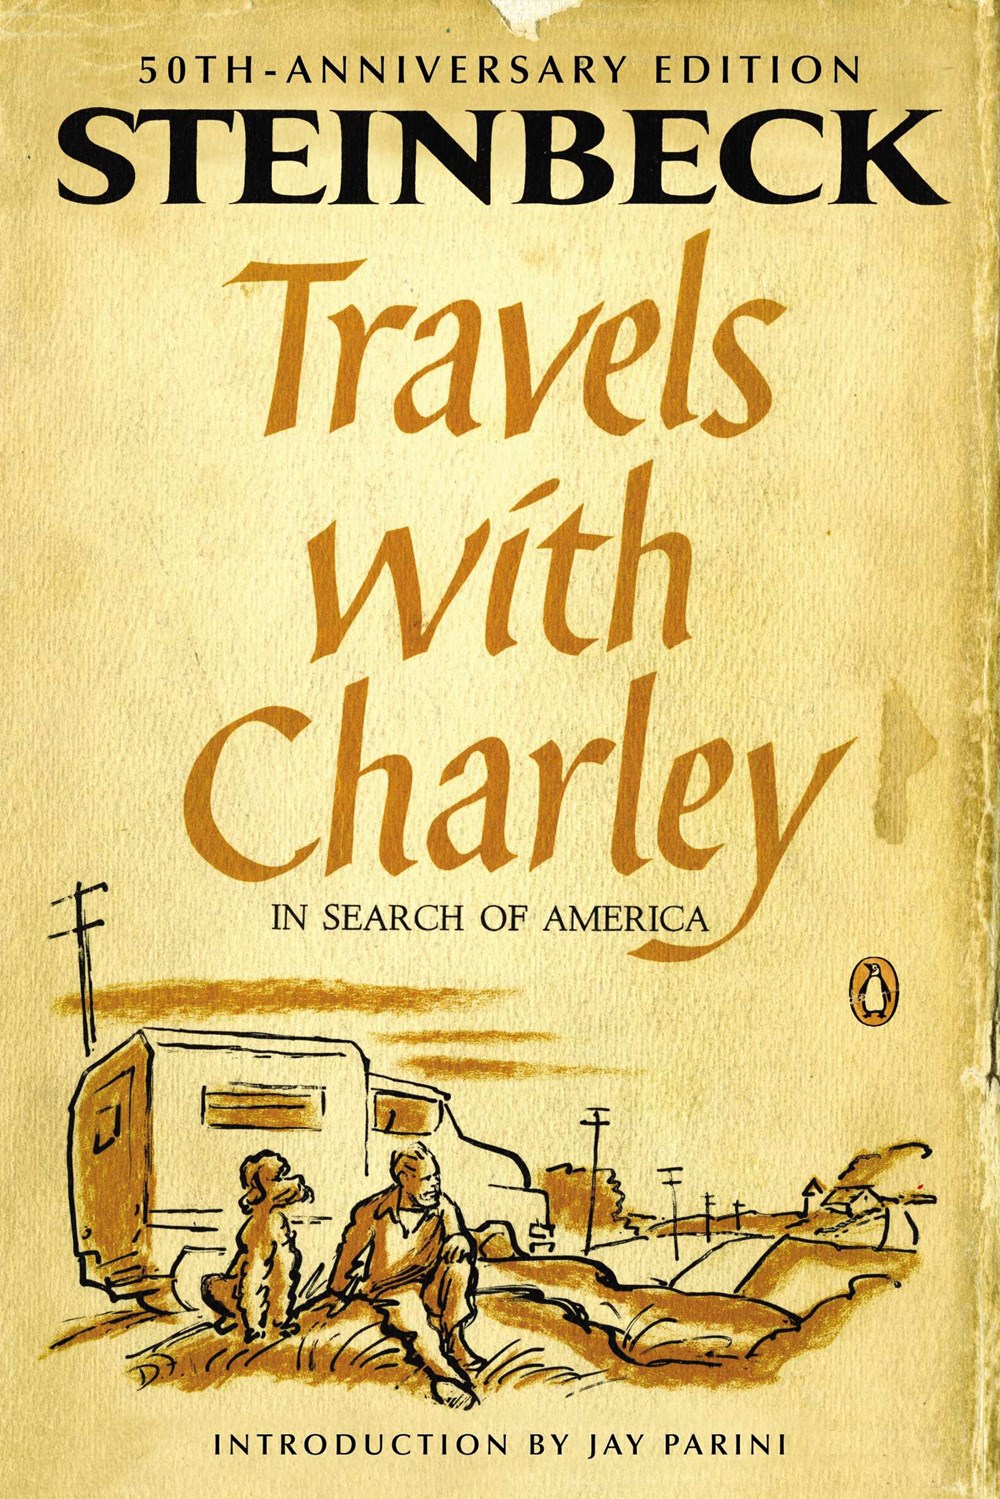 Travels with Charley cover image